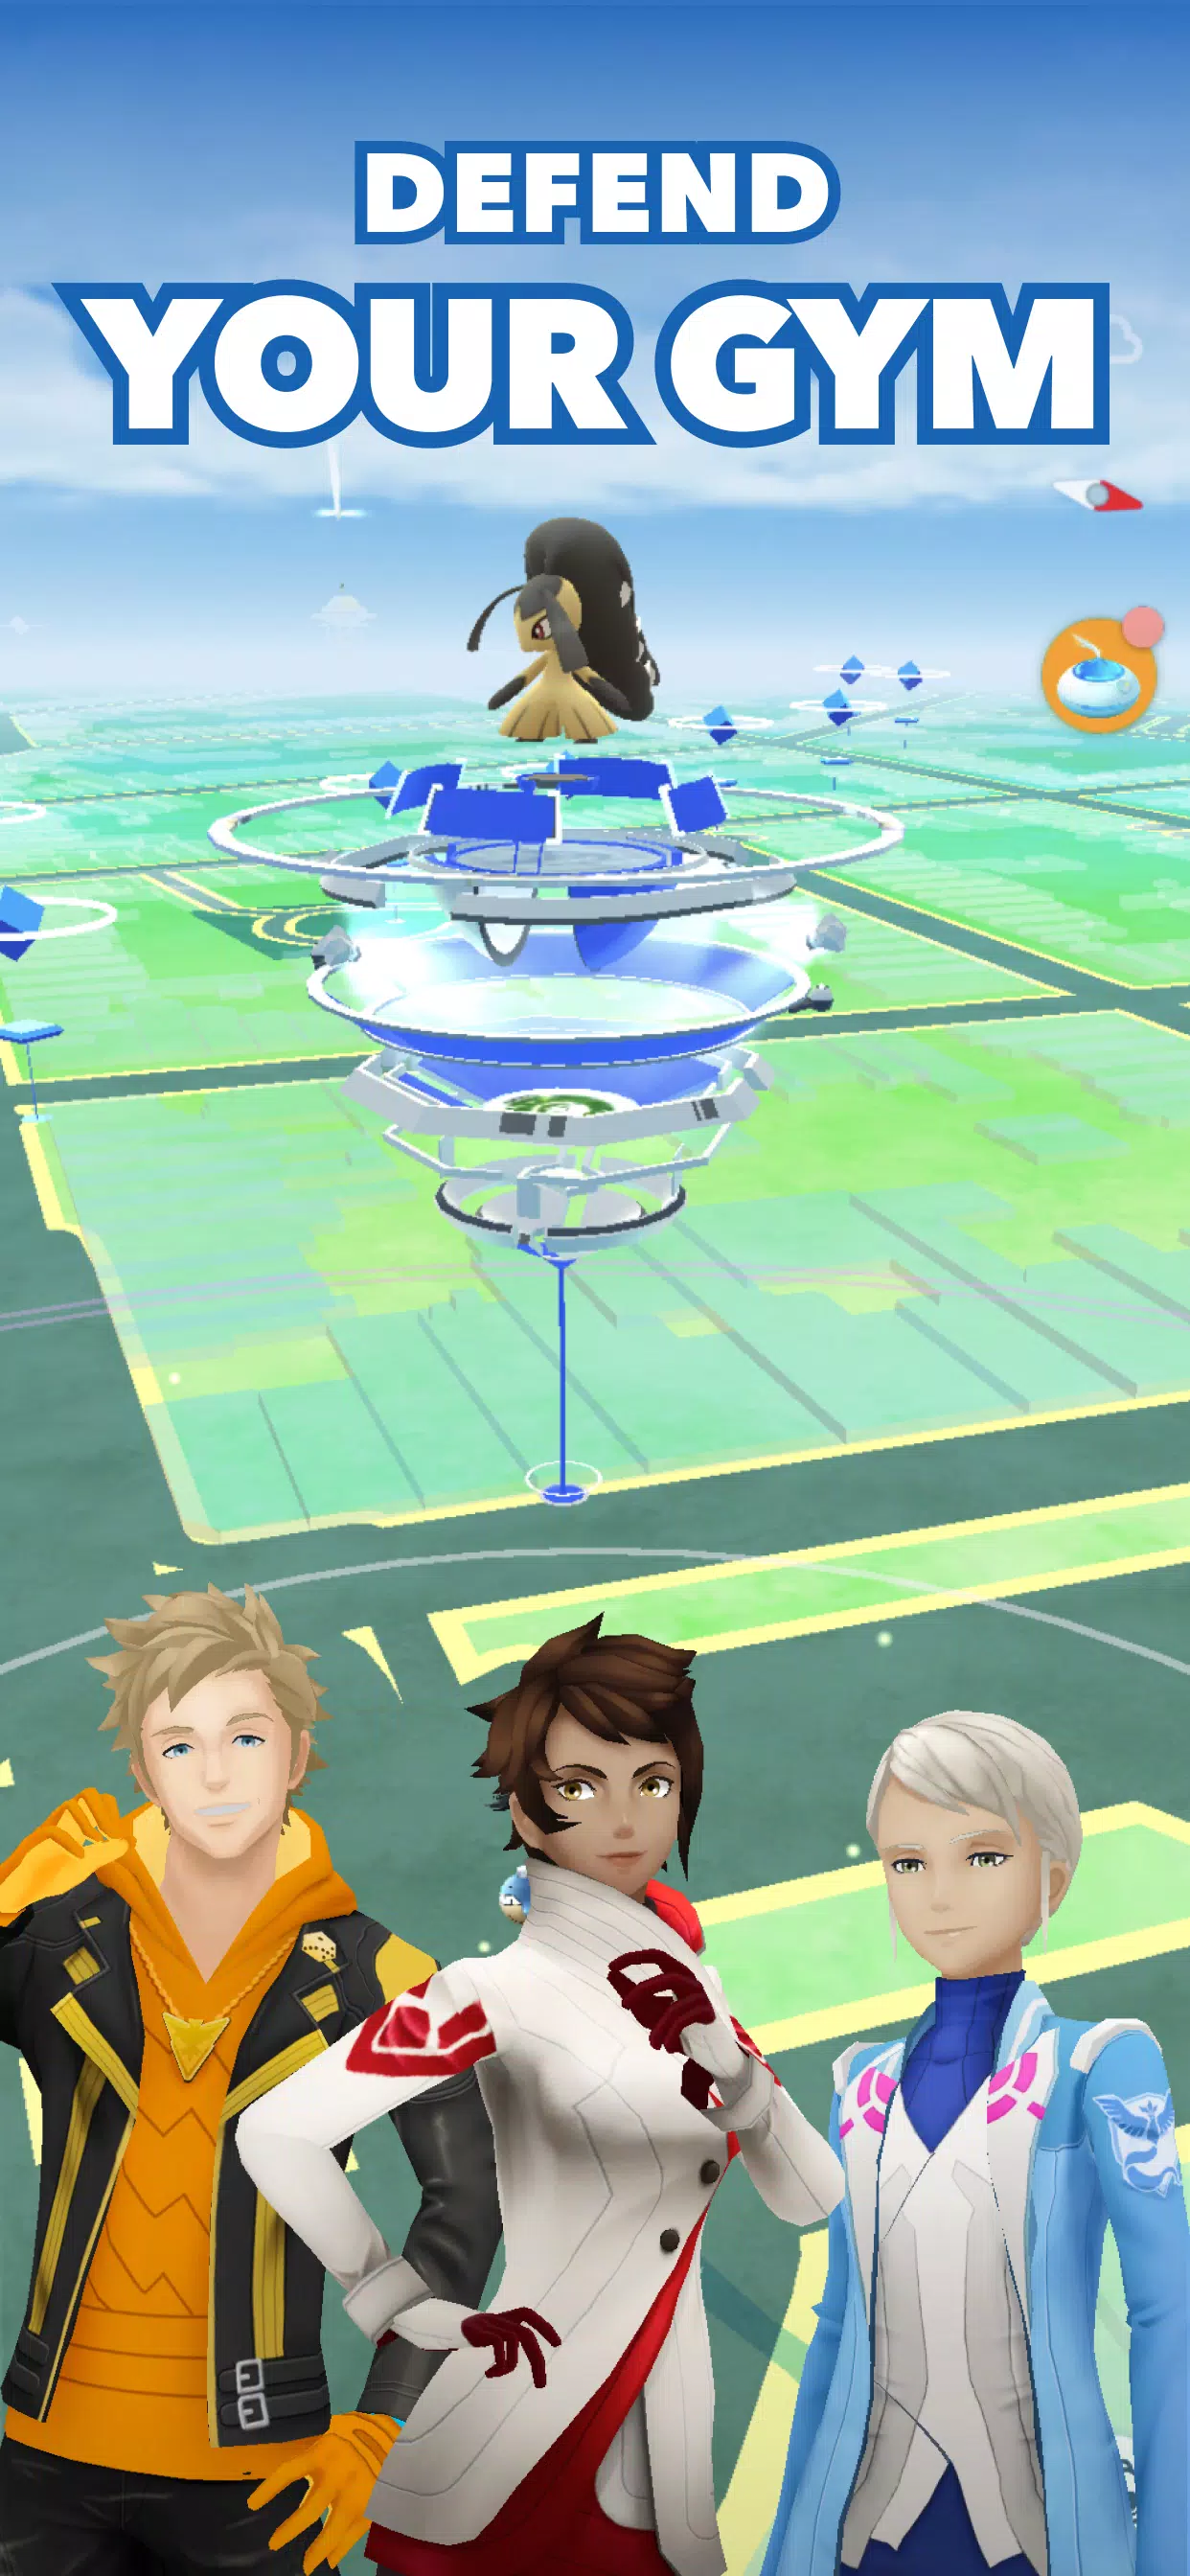 Download Pokémon GO APK 0.289.1 For Android